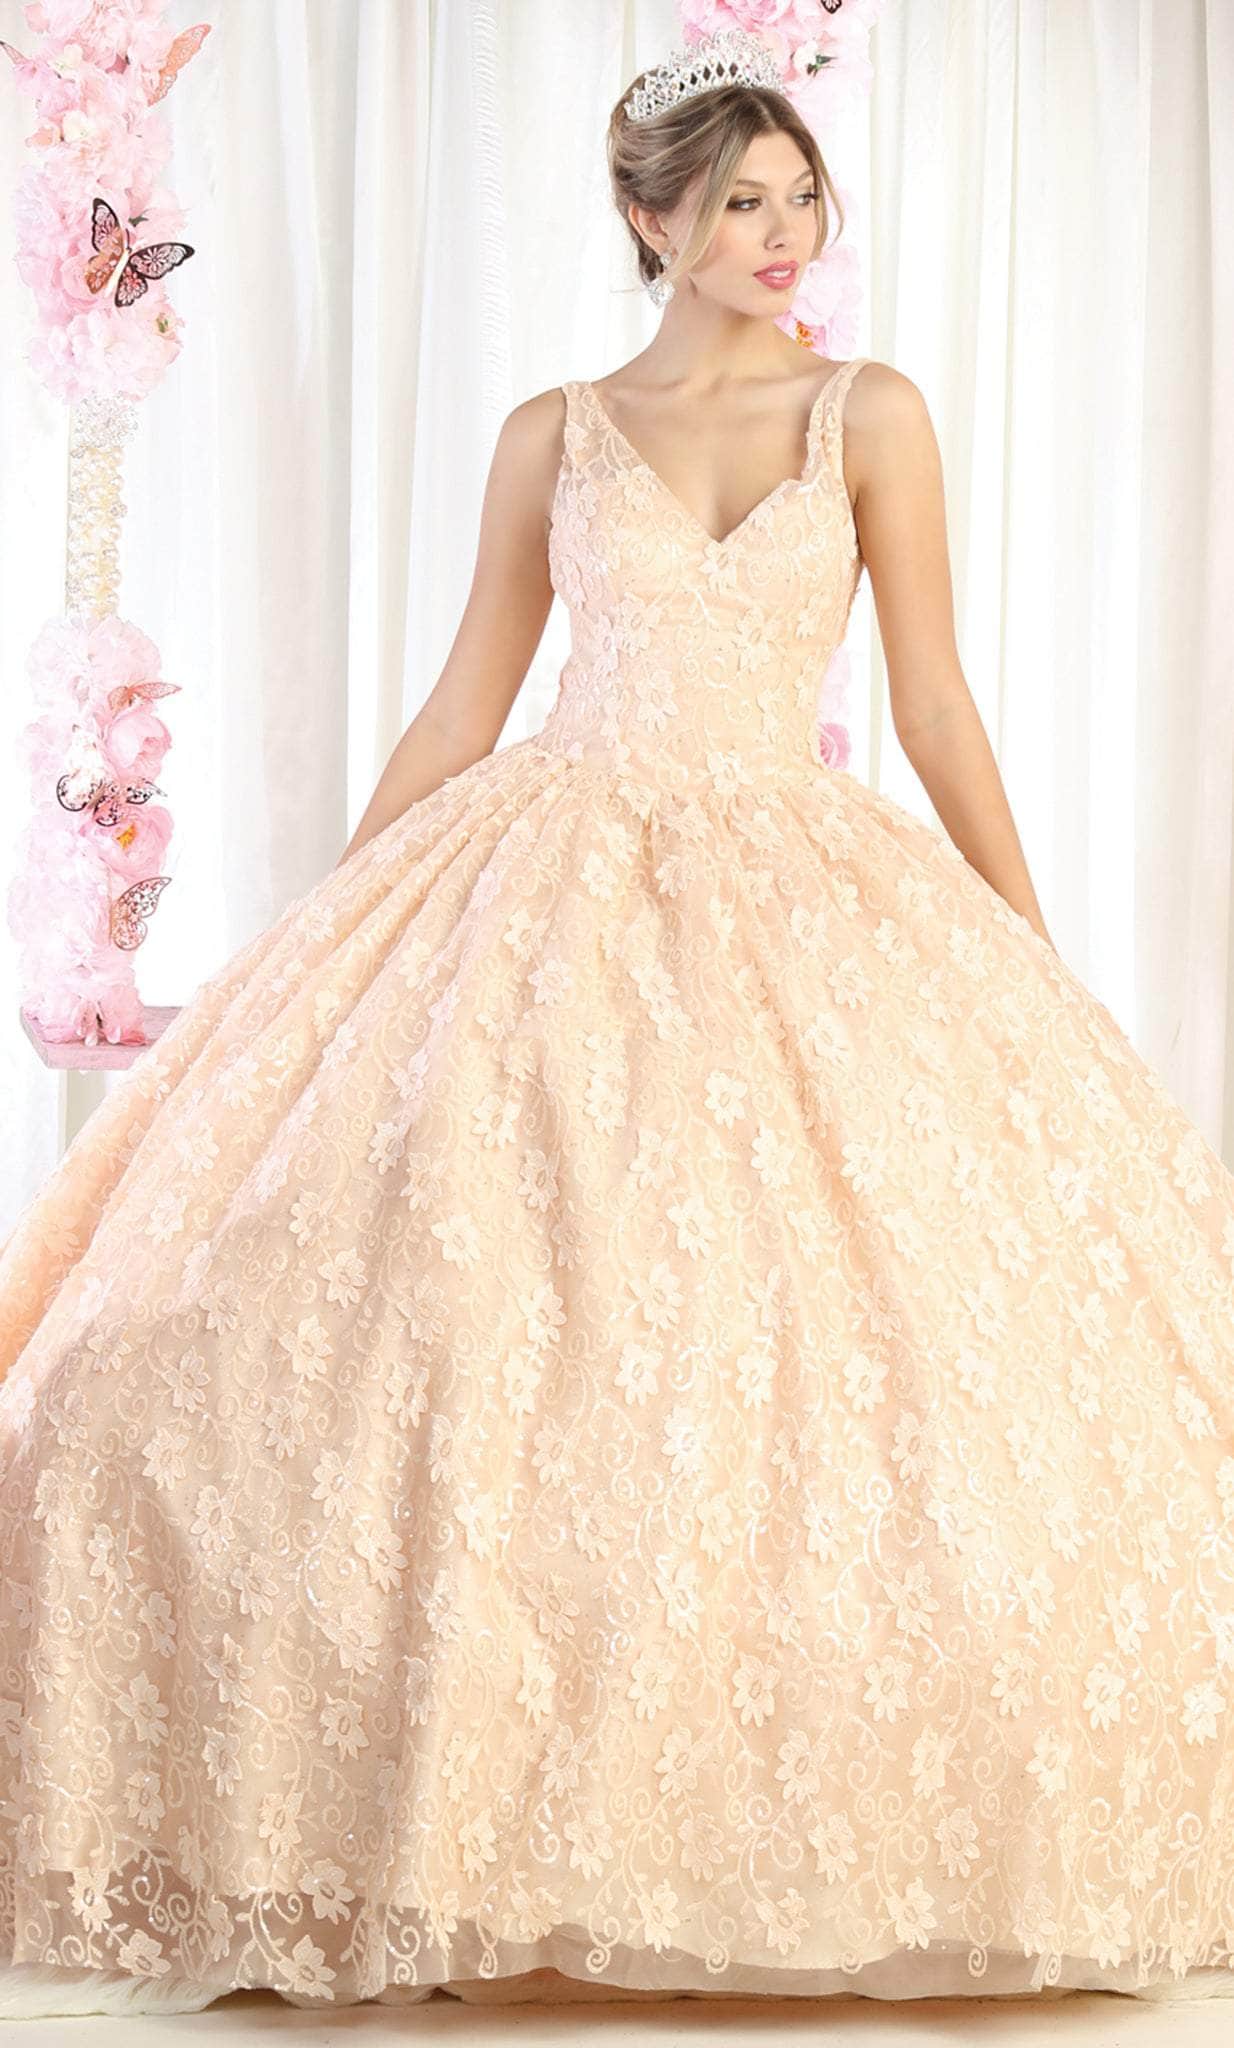 Image of May Queen LK168 - Floral Lace Quinceanera Ballgown